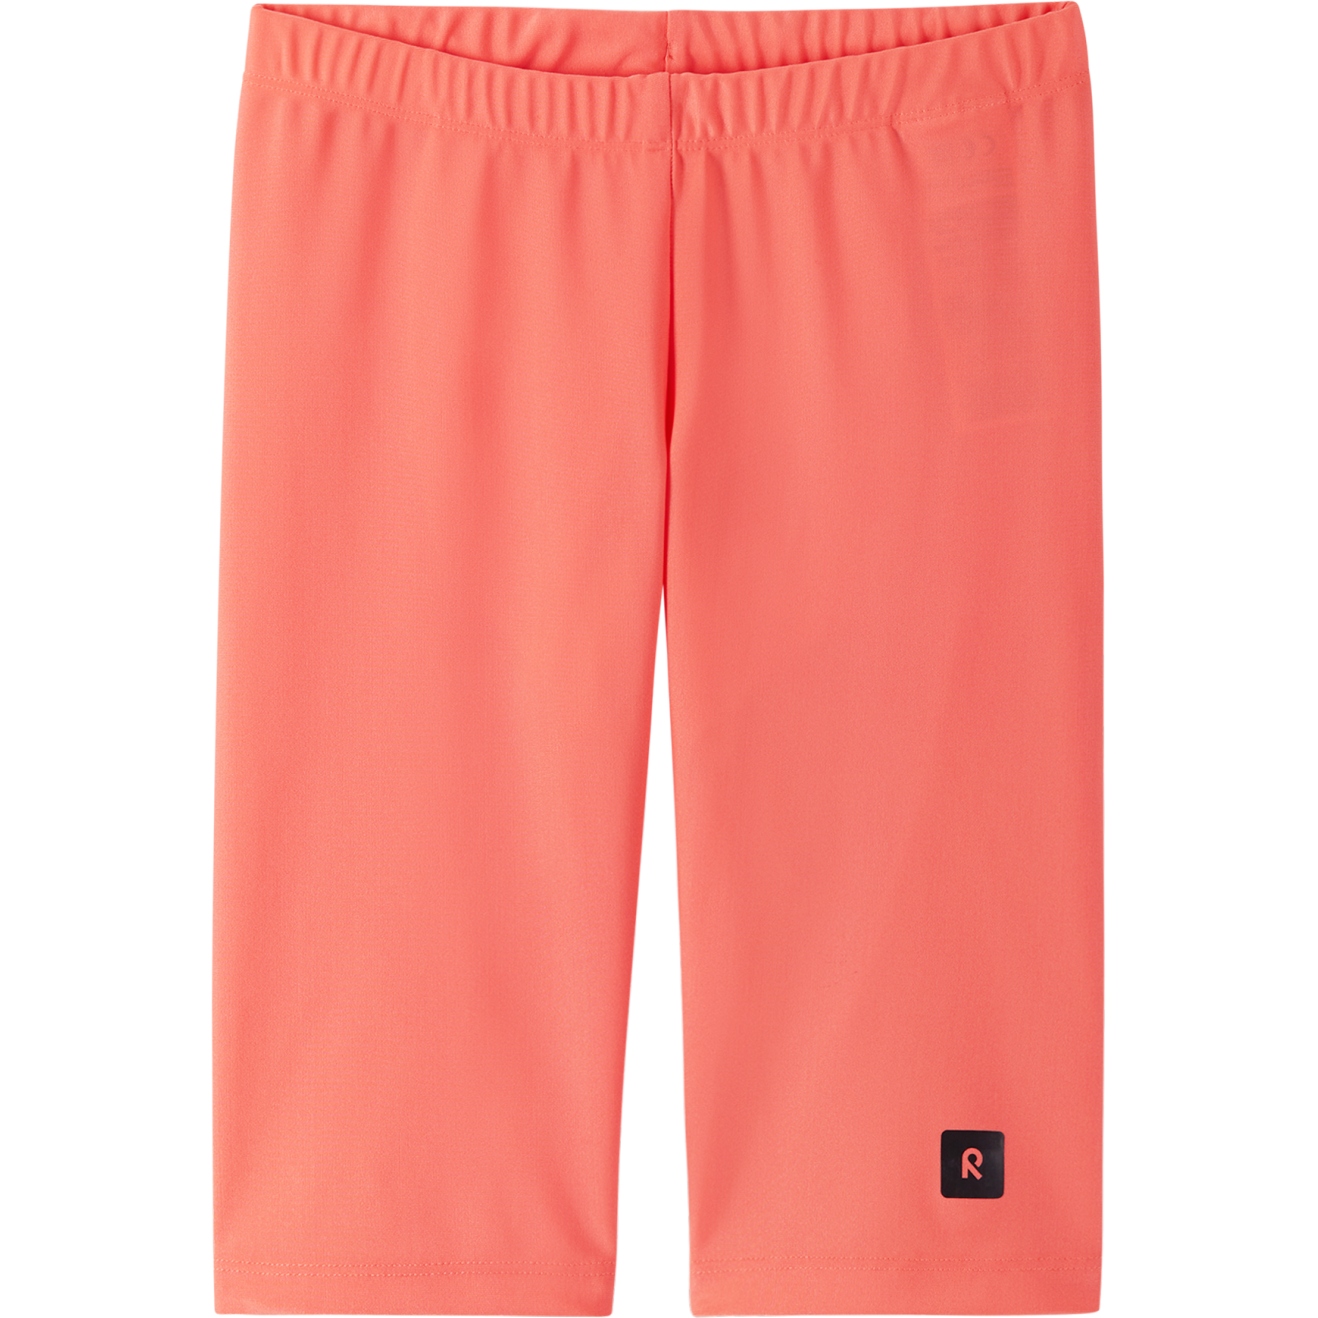 Picture of Reima Aaltoa Swimming Trunks Junior - misty red 3240